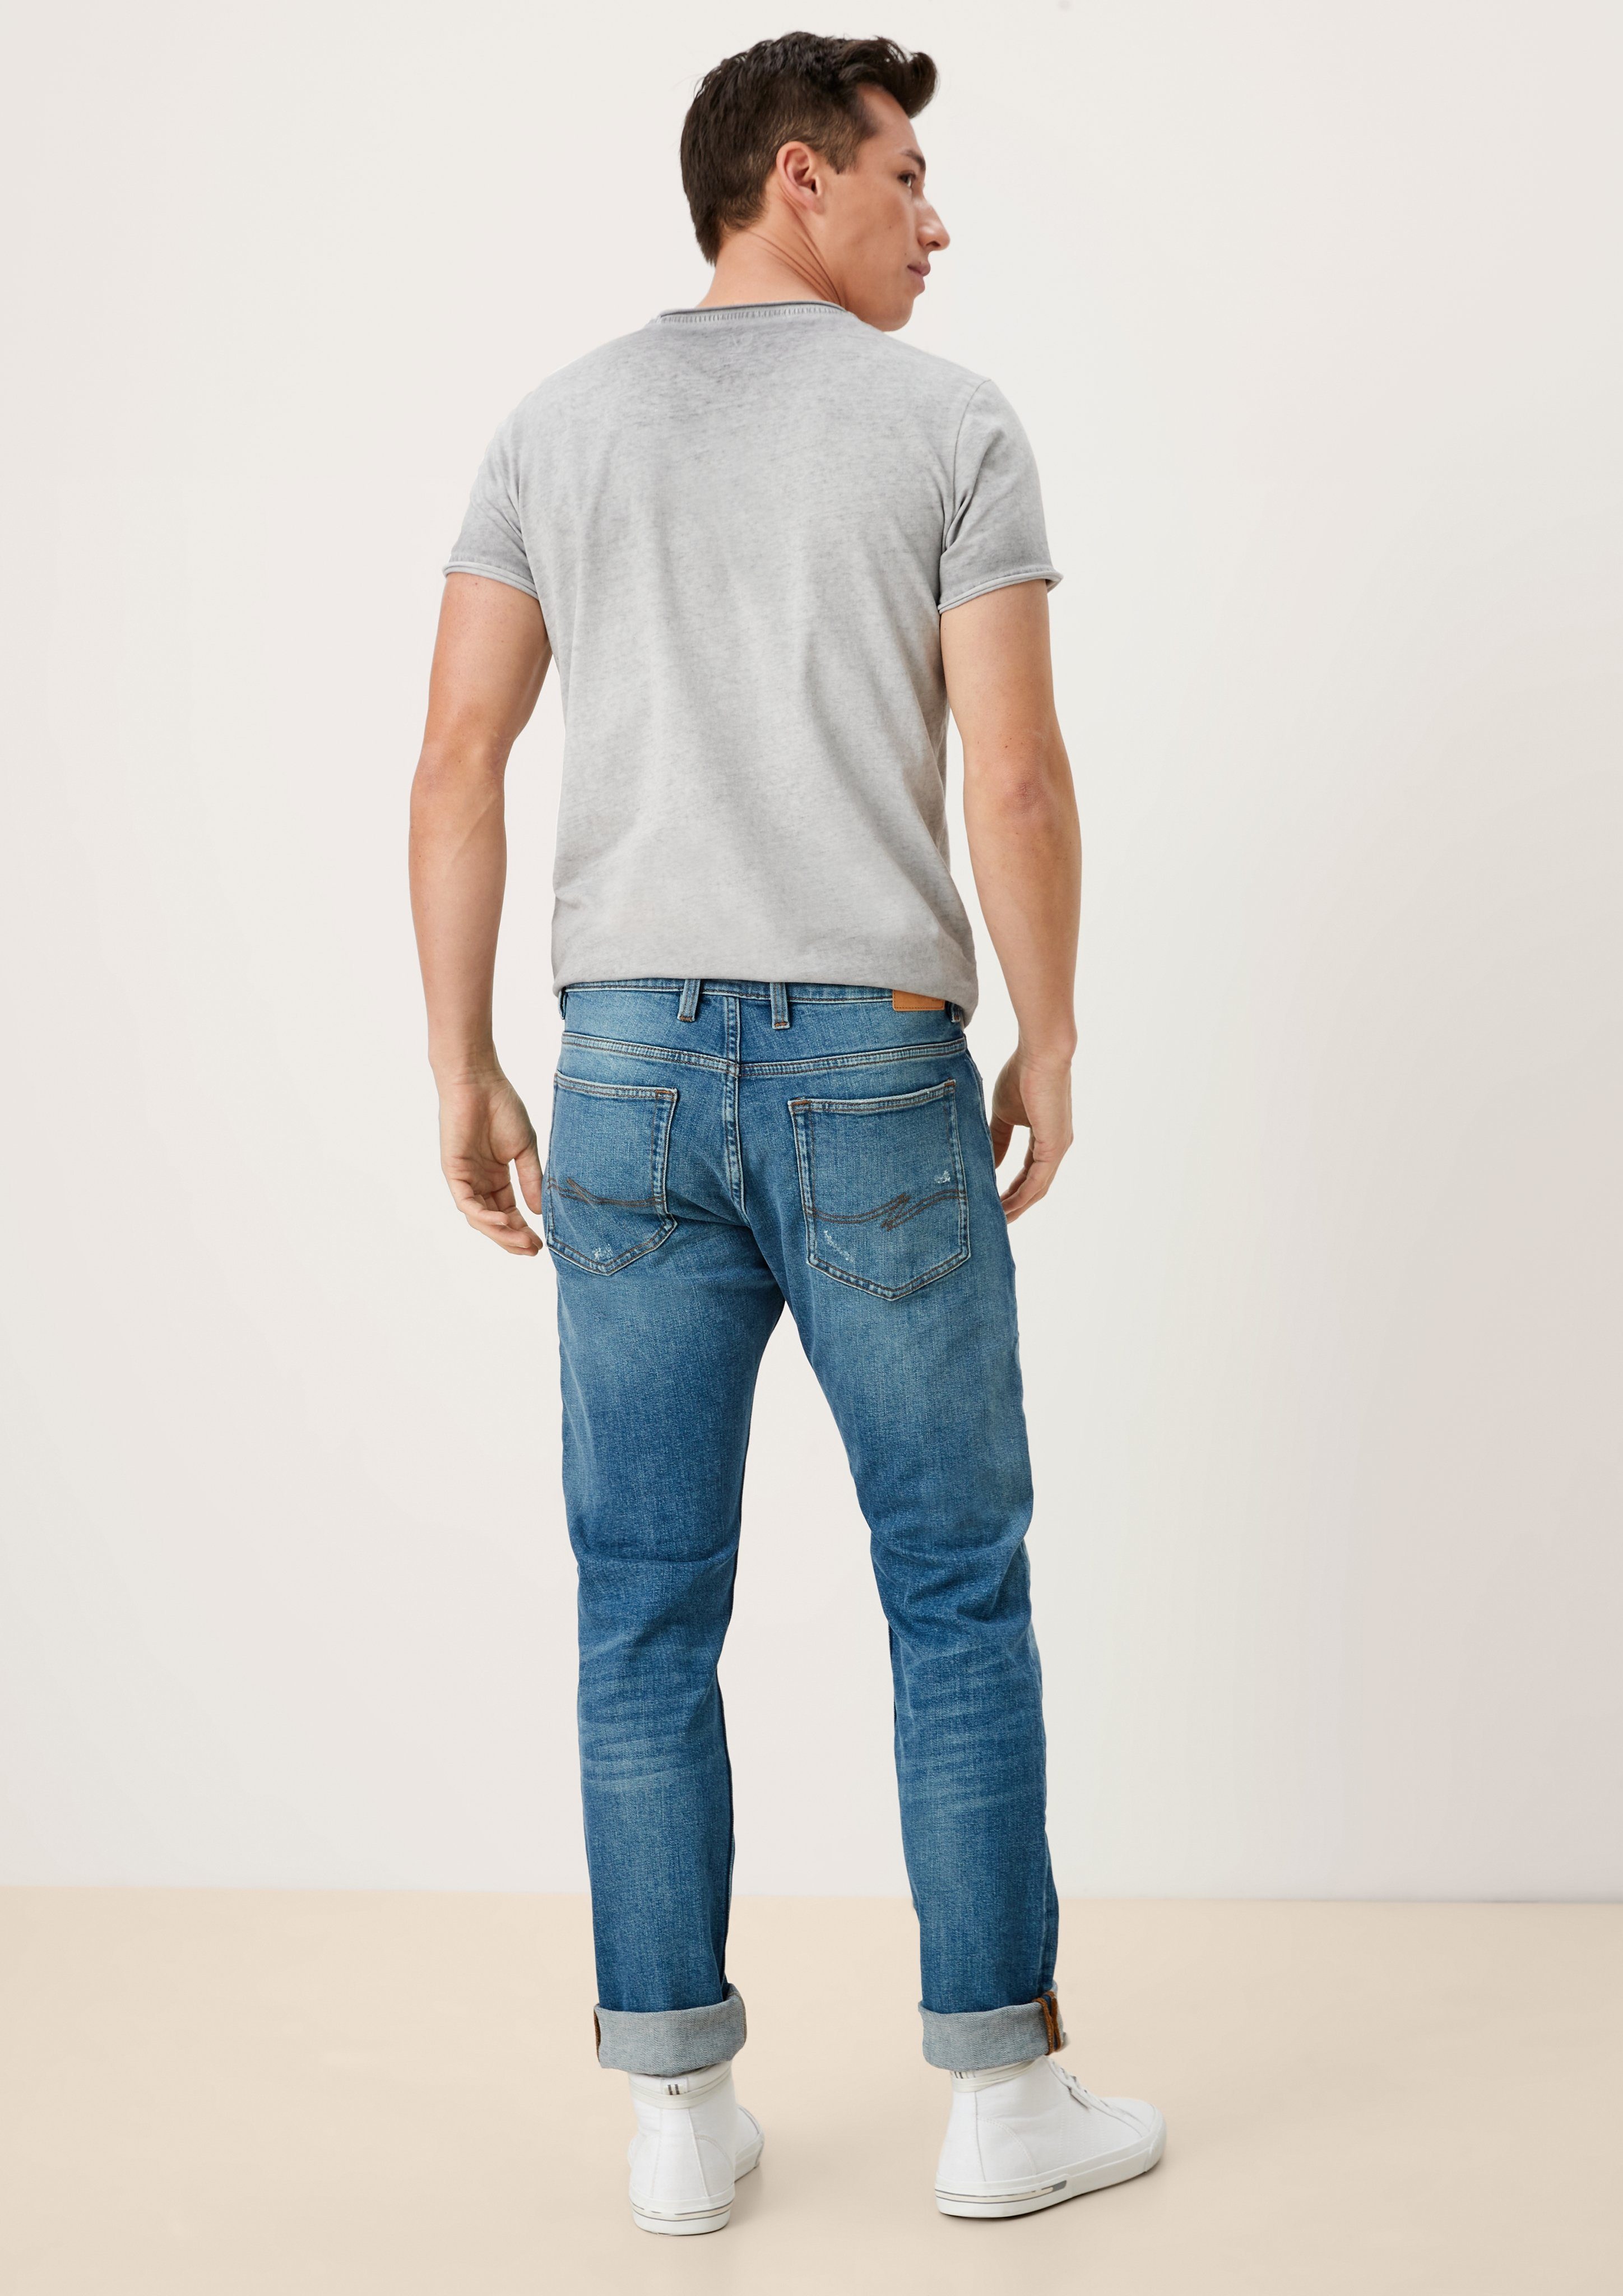 Herren Jeans Q/S by s.Oliver 5-Pocket-Jeans Slim: Jeans im Used-Look Waschung, Destroyes